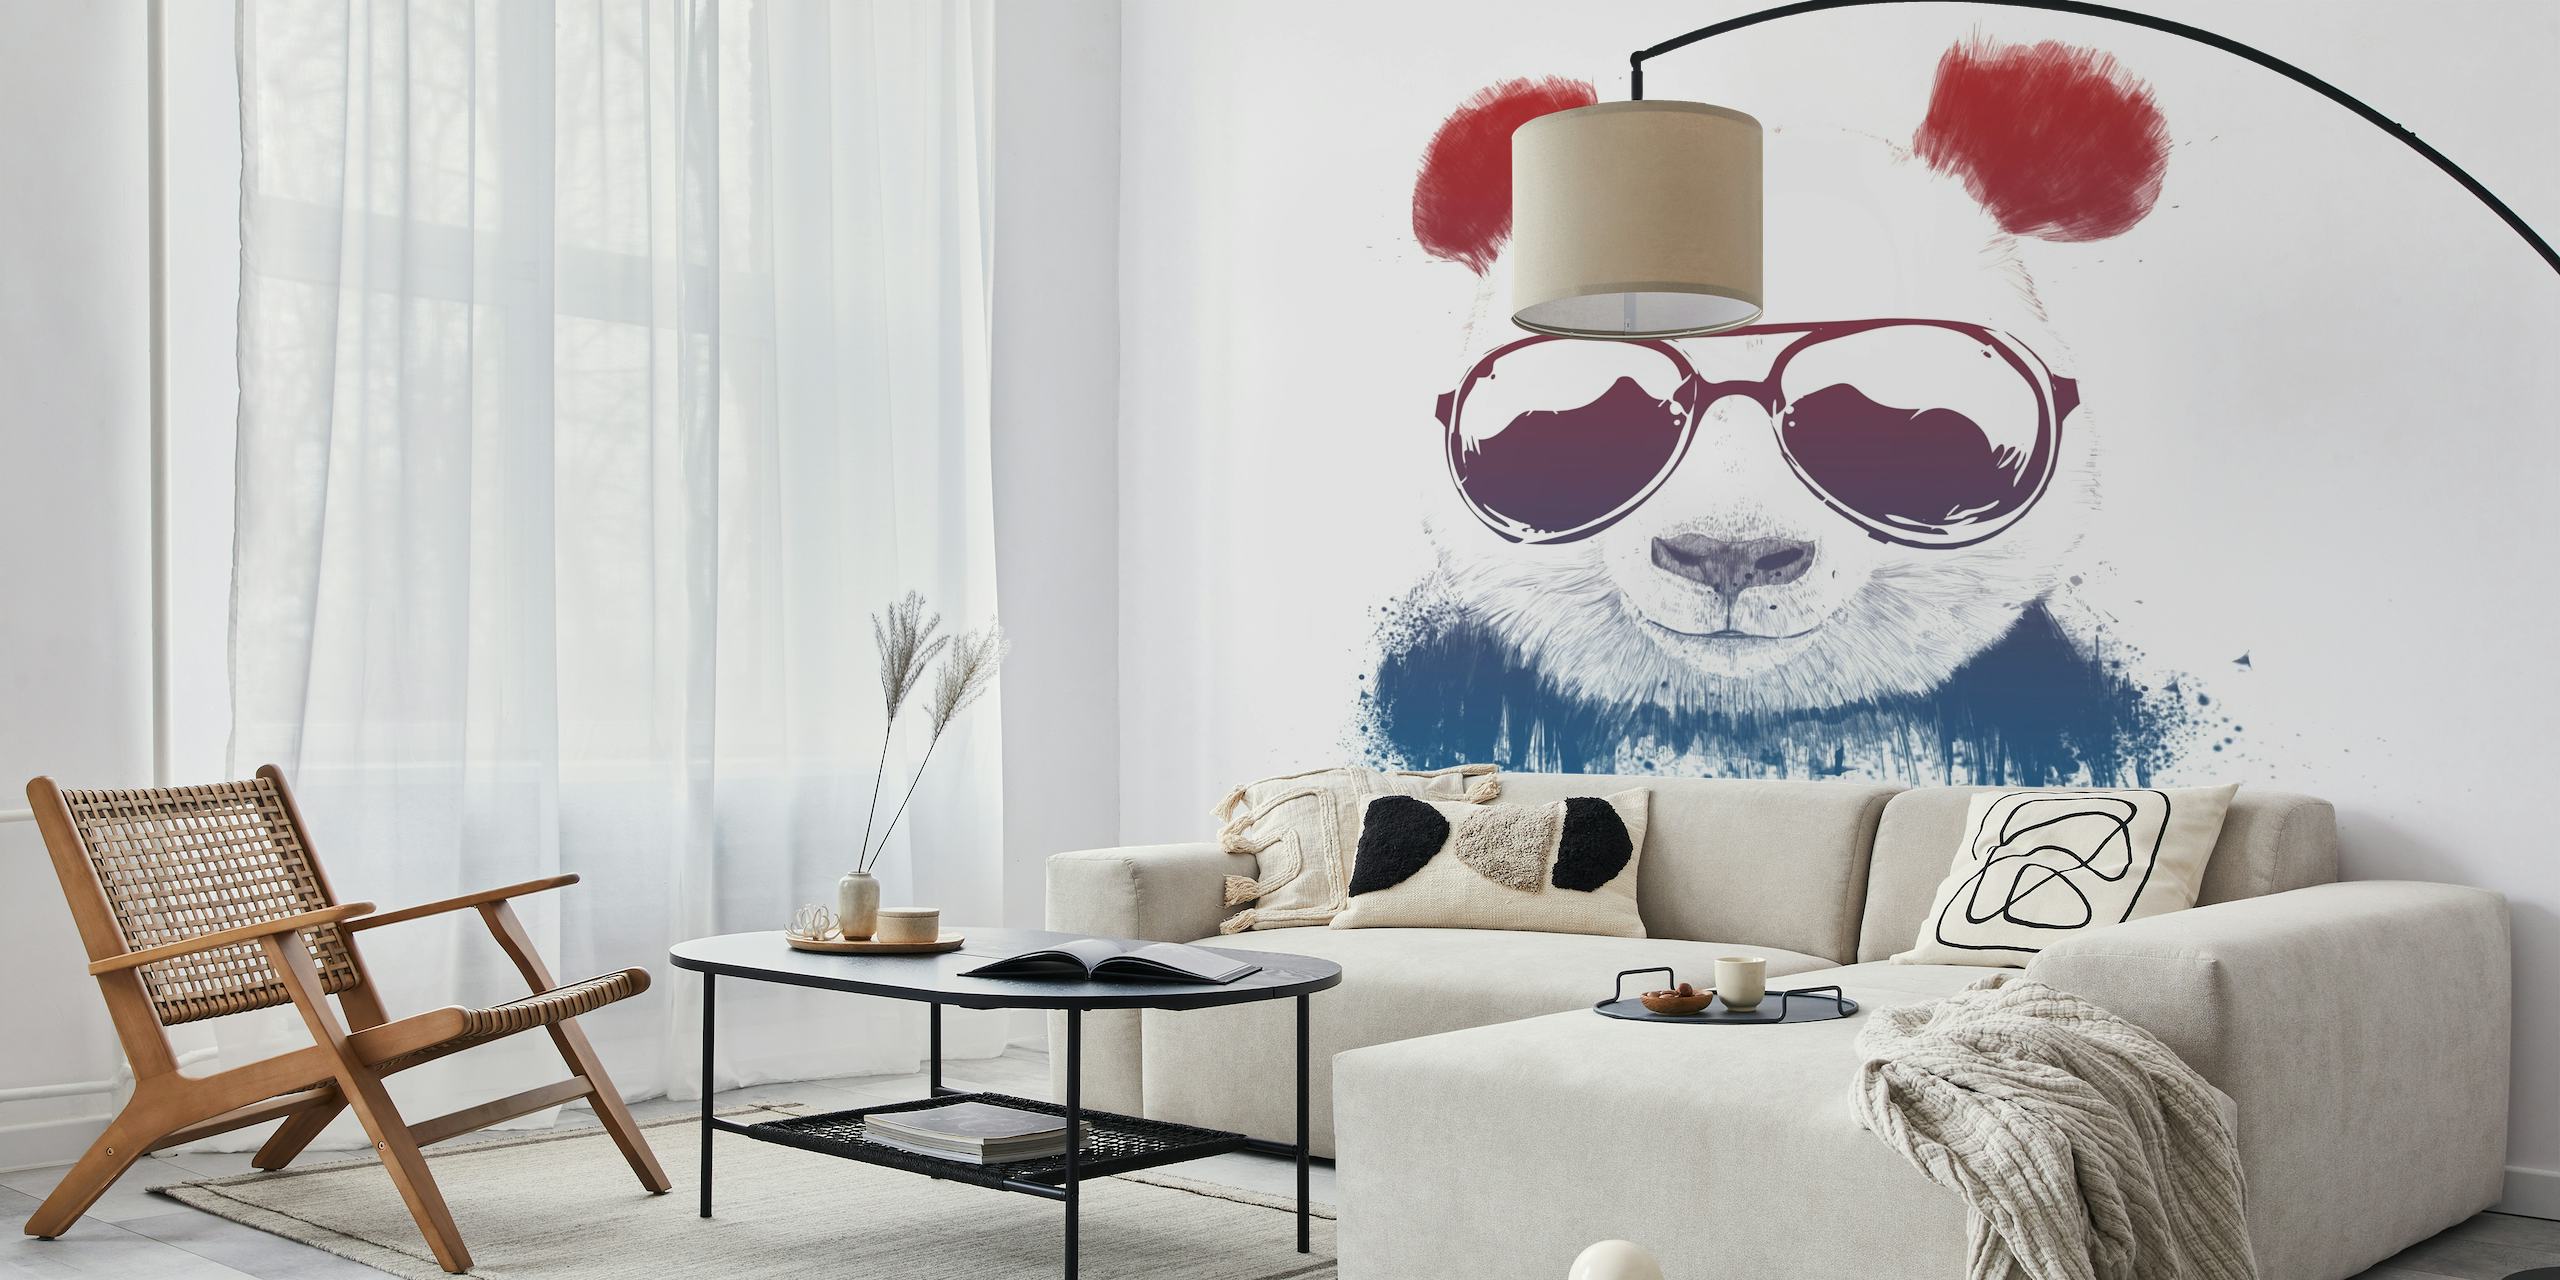 Wall mural of a stylish panda with sunglasses and red-tinted ears against a white background with blue paint drips